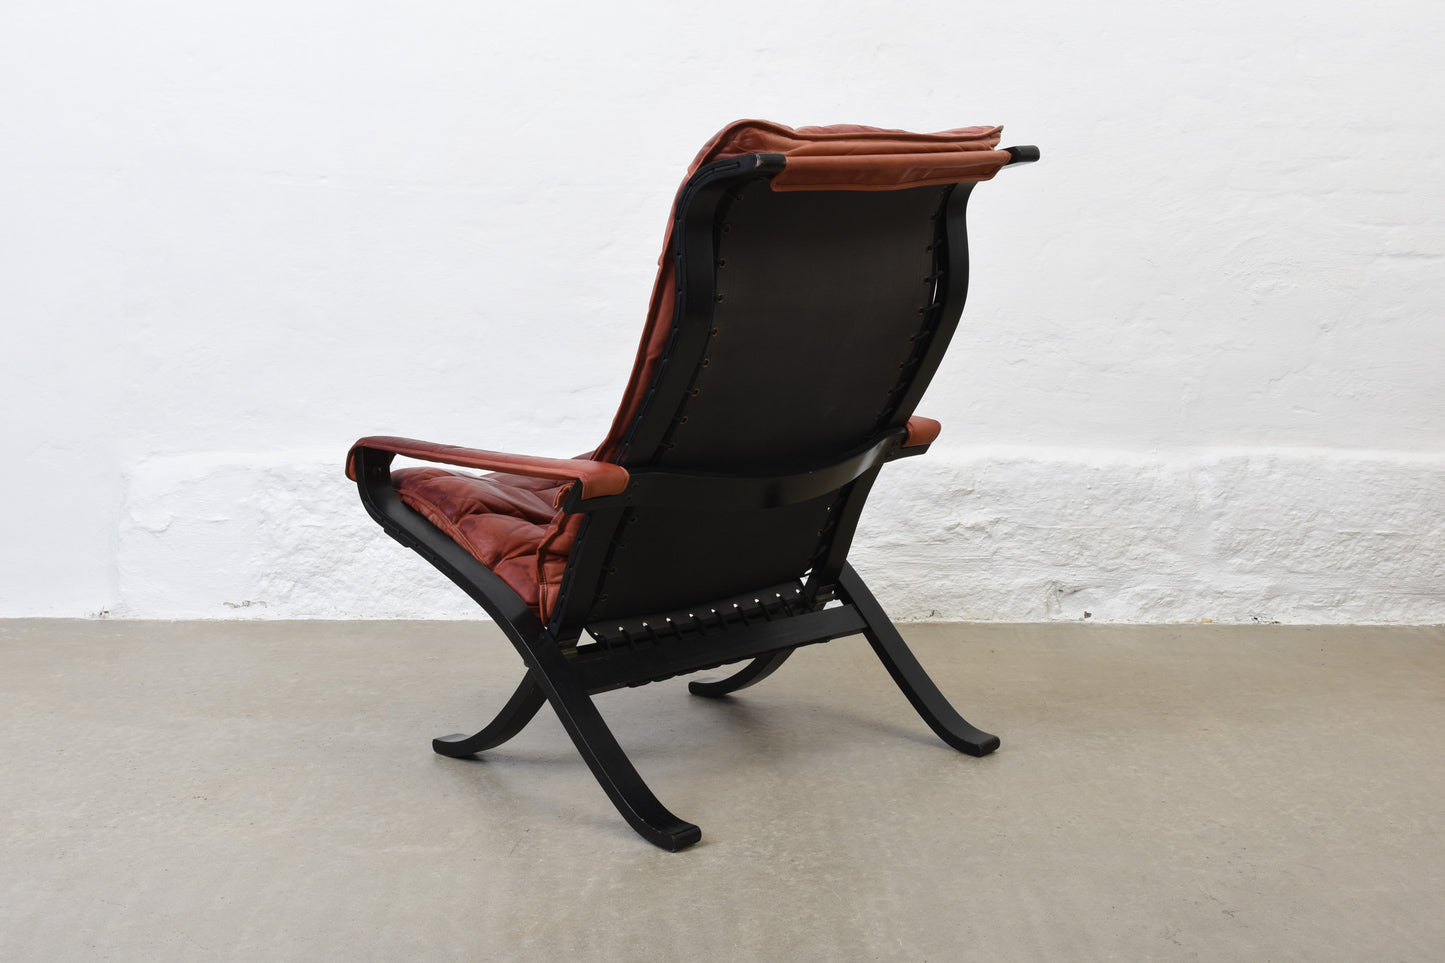 1970s beech + leather lounger by Ingmar Relling - High back